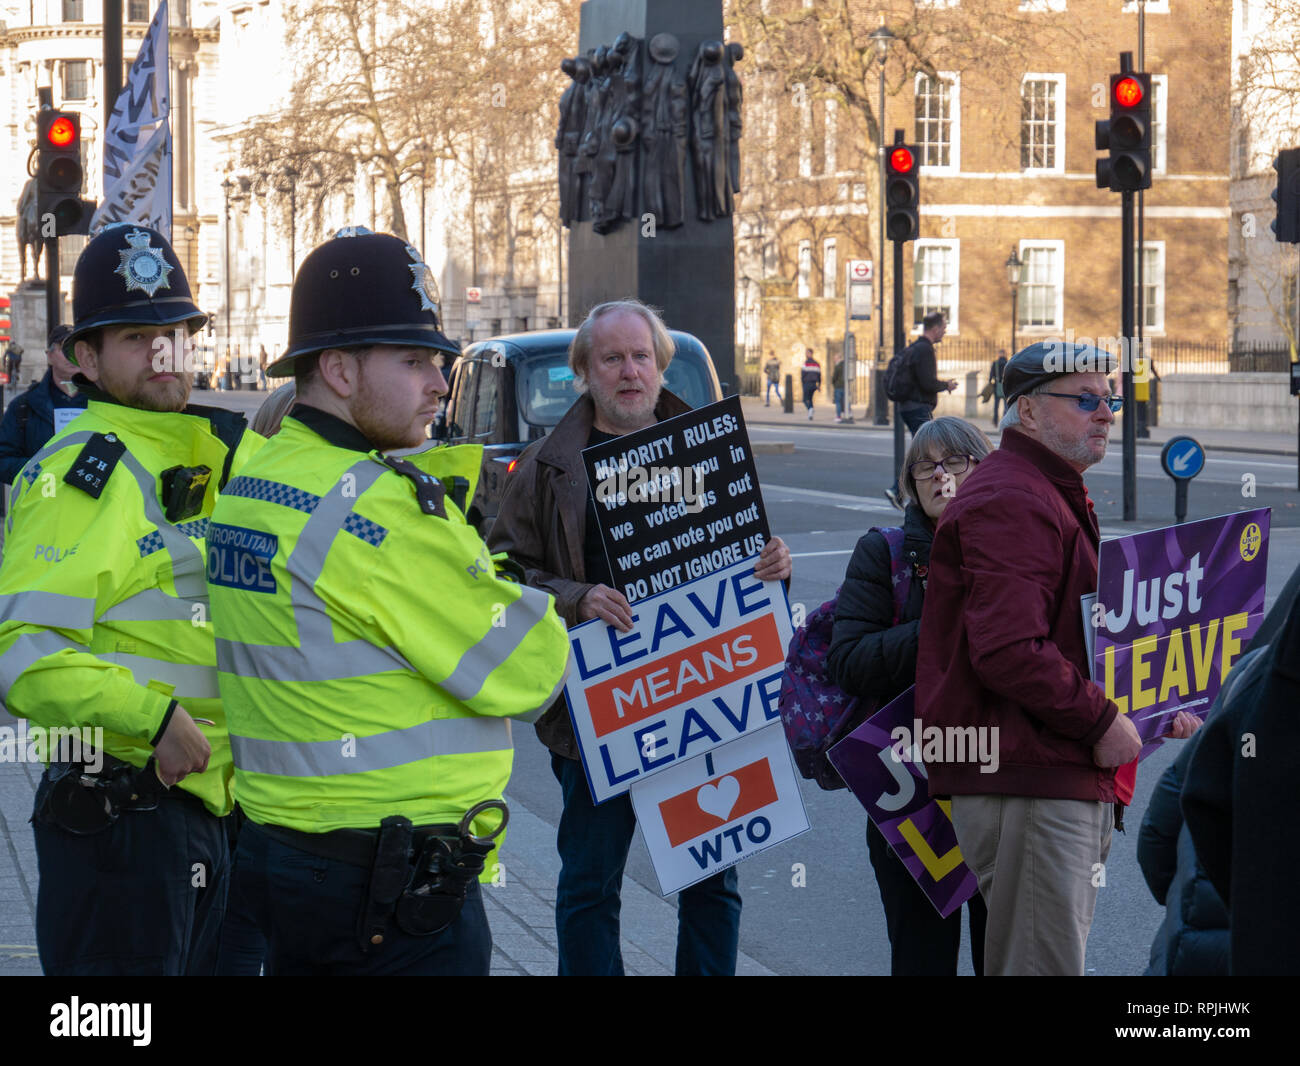 London, England - February 14, 2019: Group of people protesting in front of Parliament to support the Brexit of England out of European Union Stock Photo